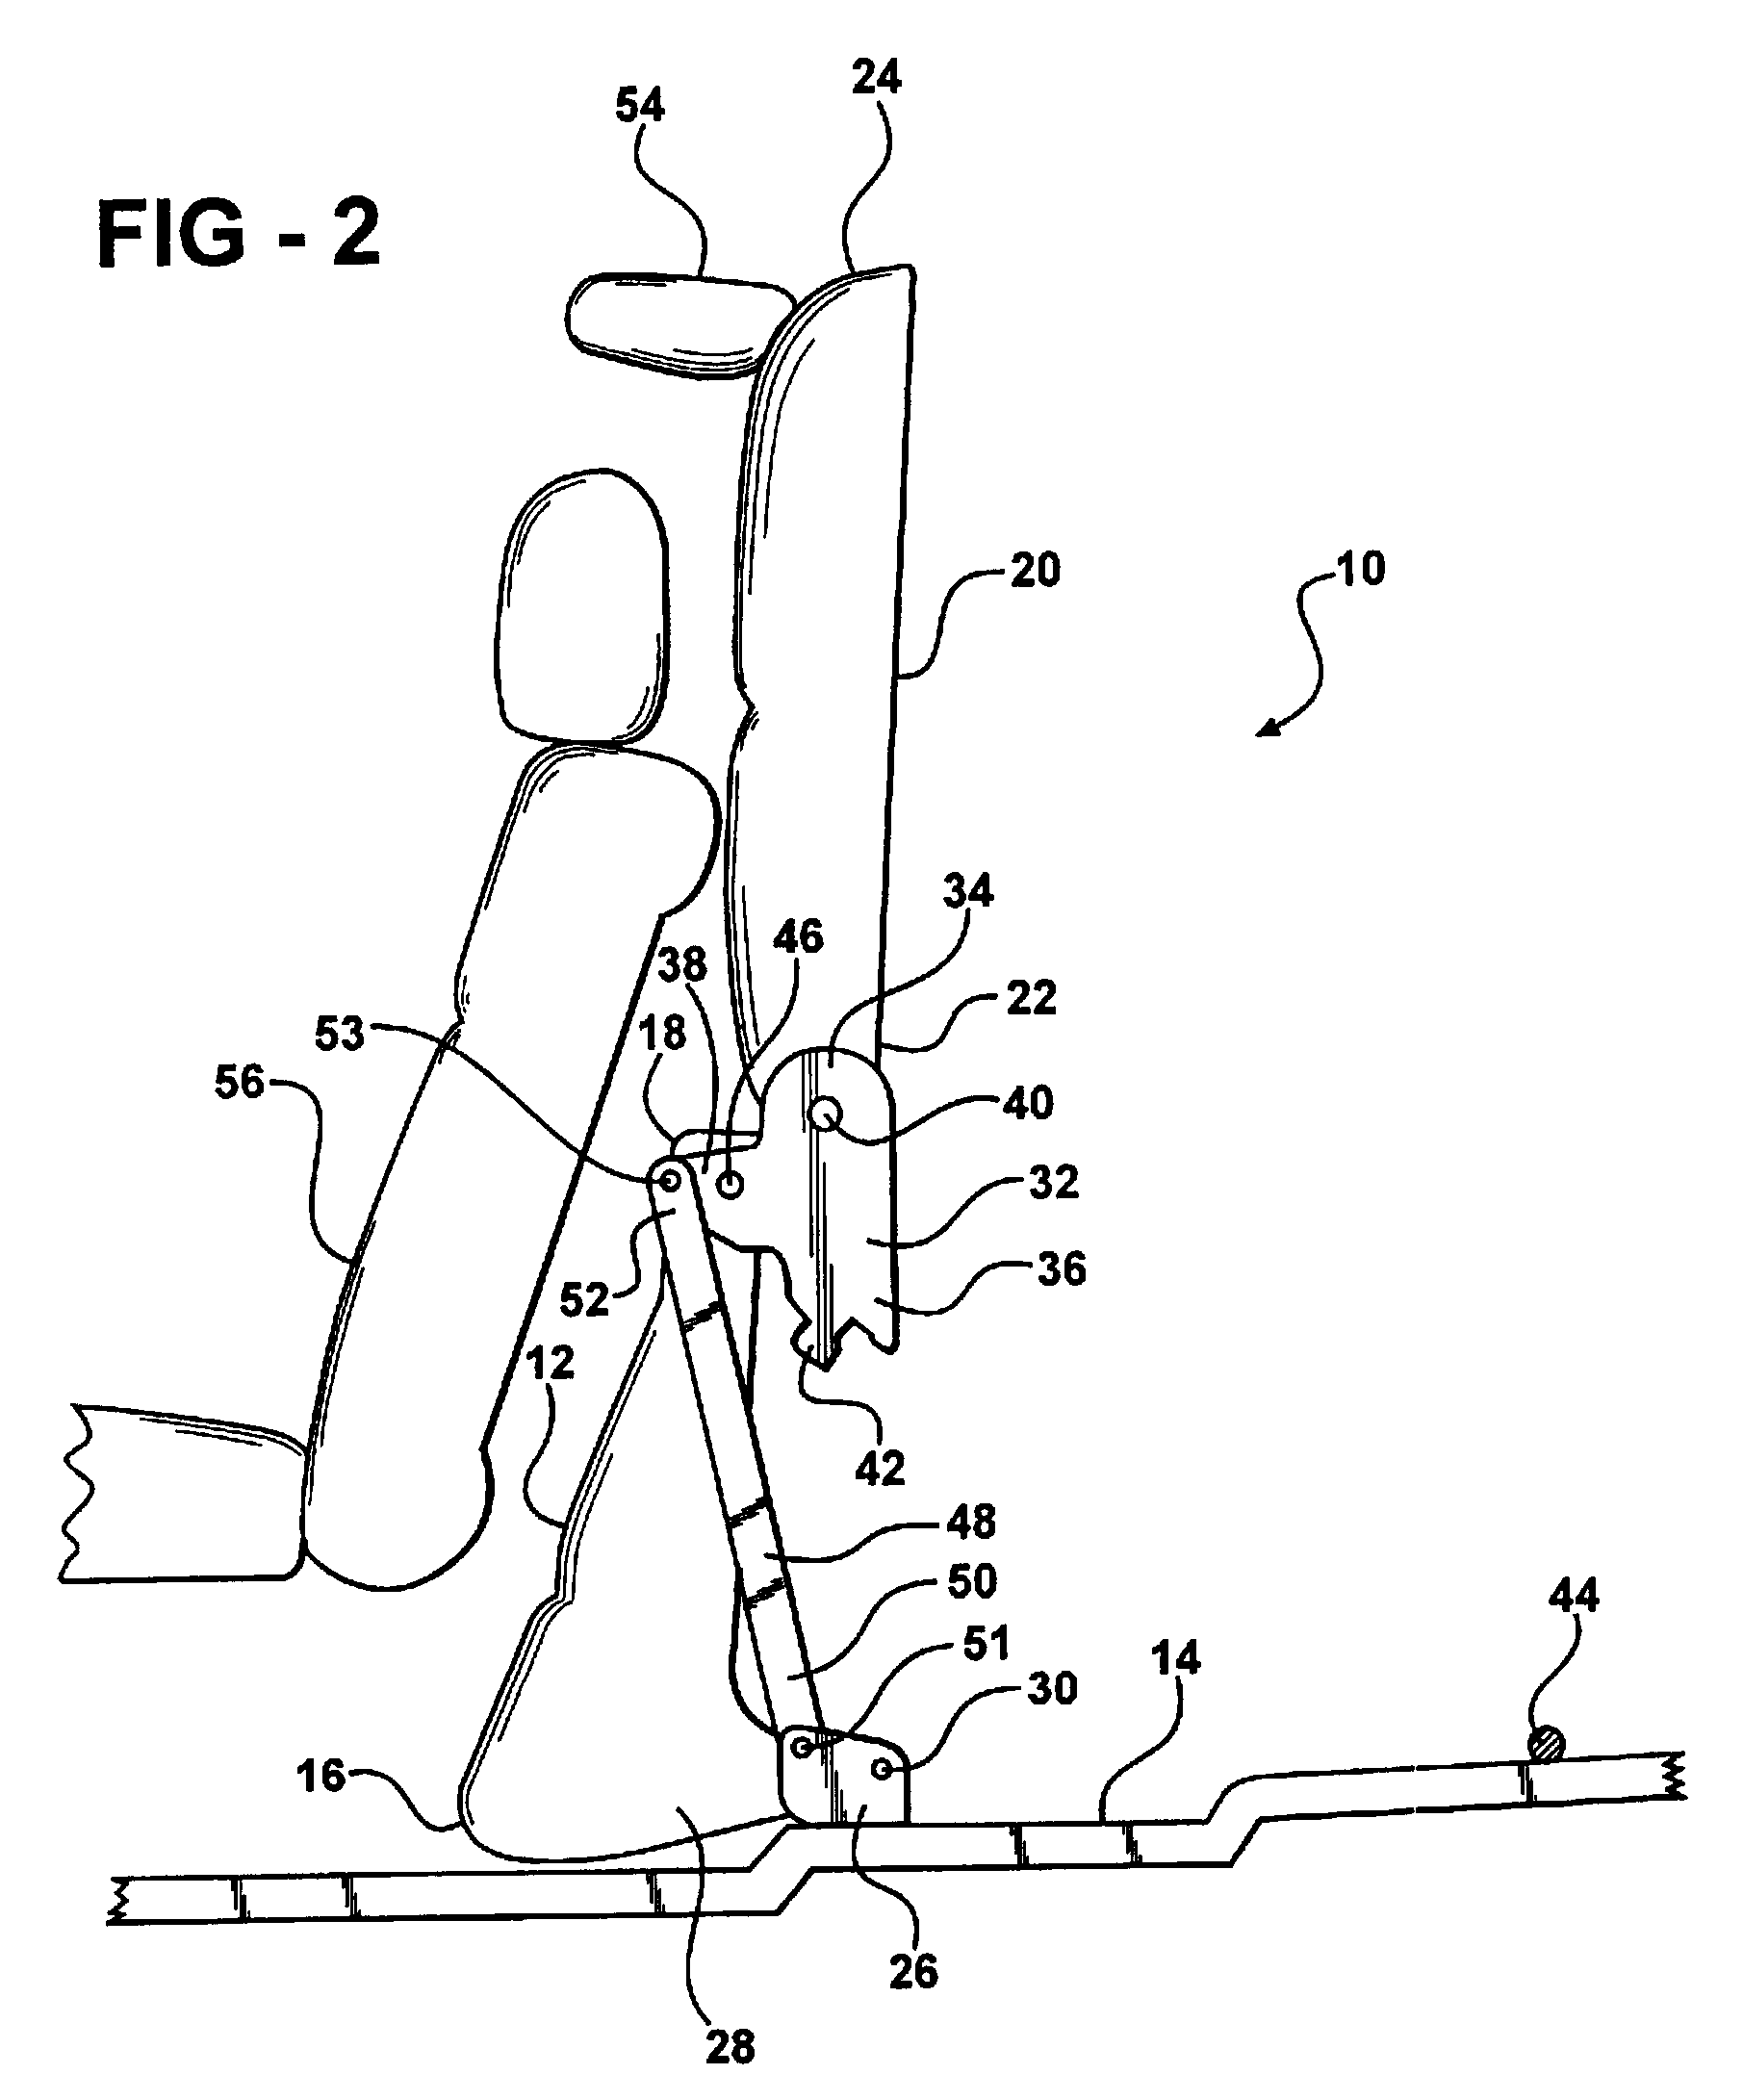 Stand up seat assembly with retractable rear leg